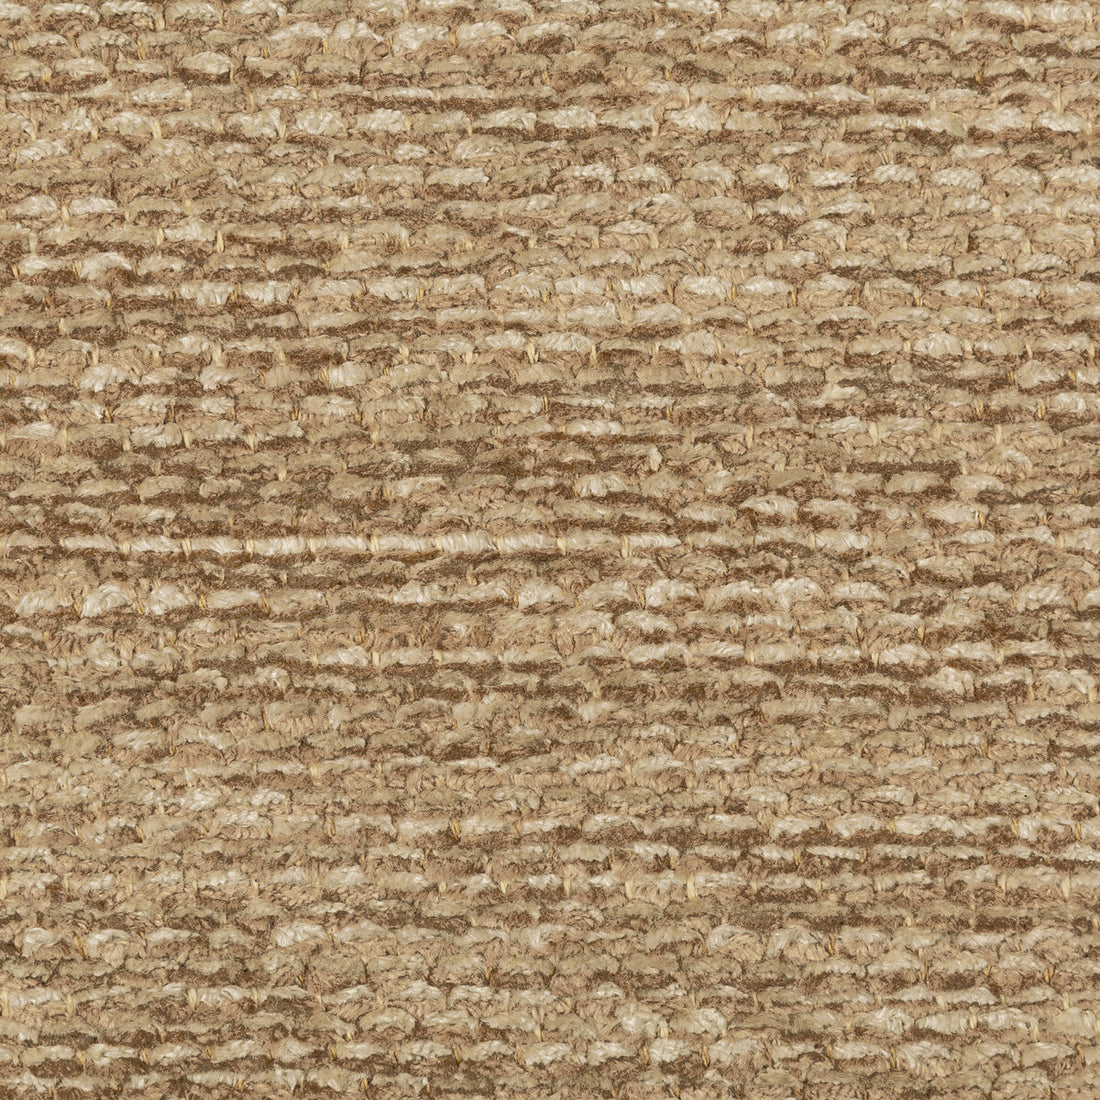 Chamoux Texture fabric in cafe color - pattern 8019145.6.0 - by Brunschwig &amp; Fils in the Chambery Textures II collection